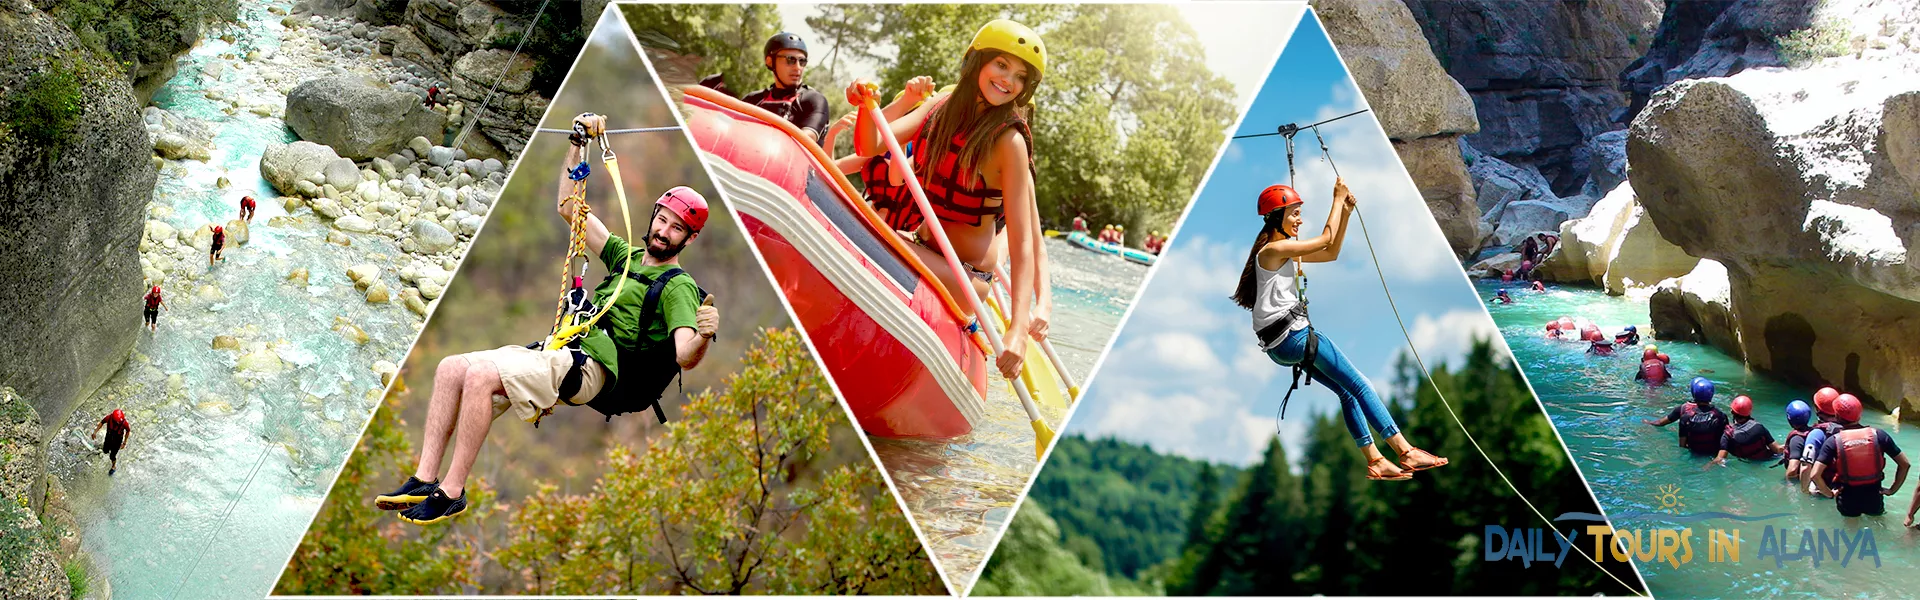 Rafting with Canyoning and Zipline in Alanya